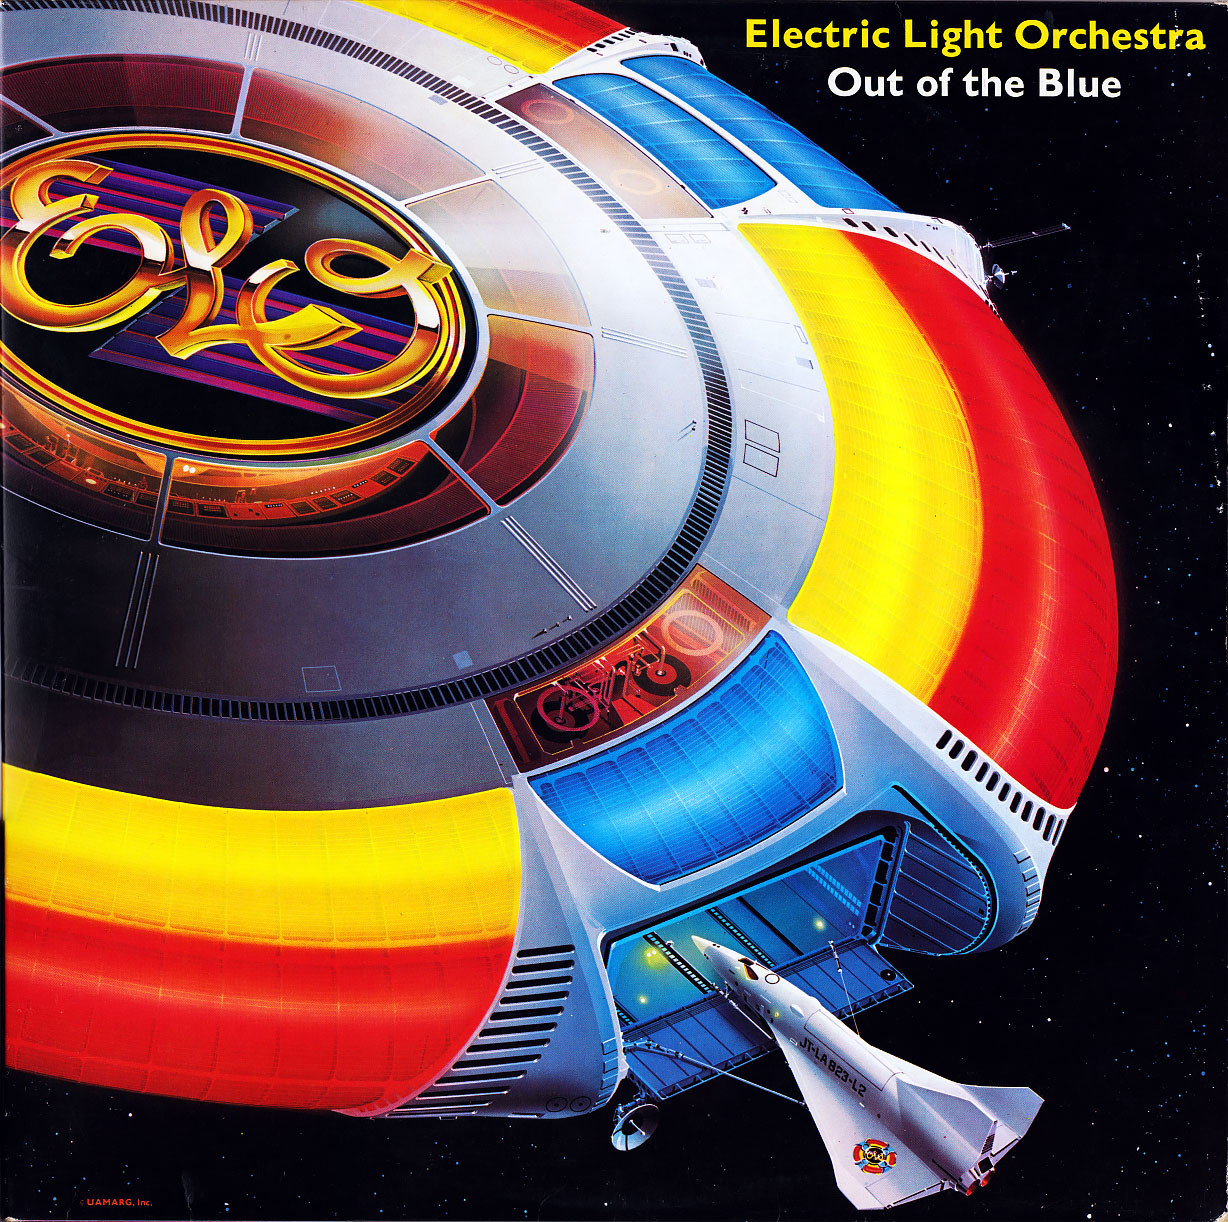 Release group “Out of the Blue” by Electric Light Orchestra MusicBrainz